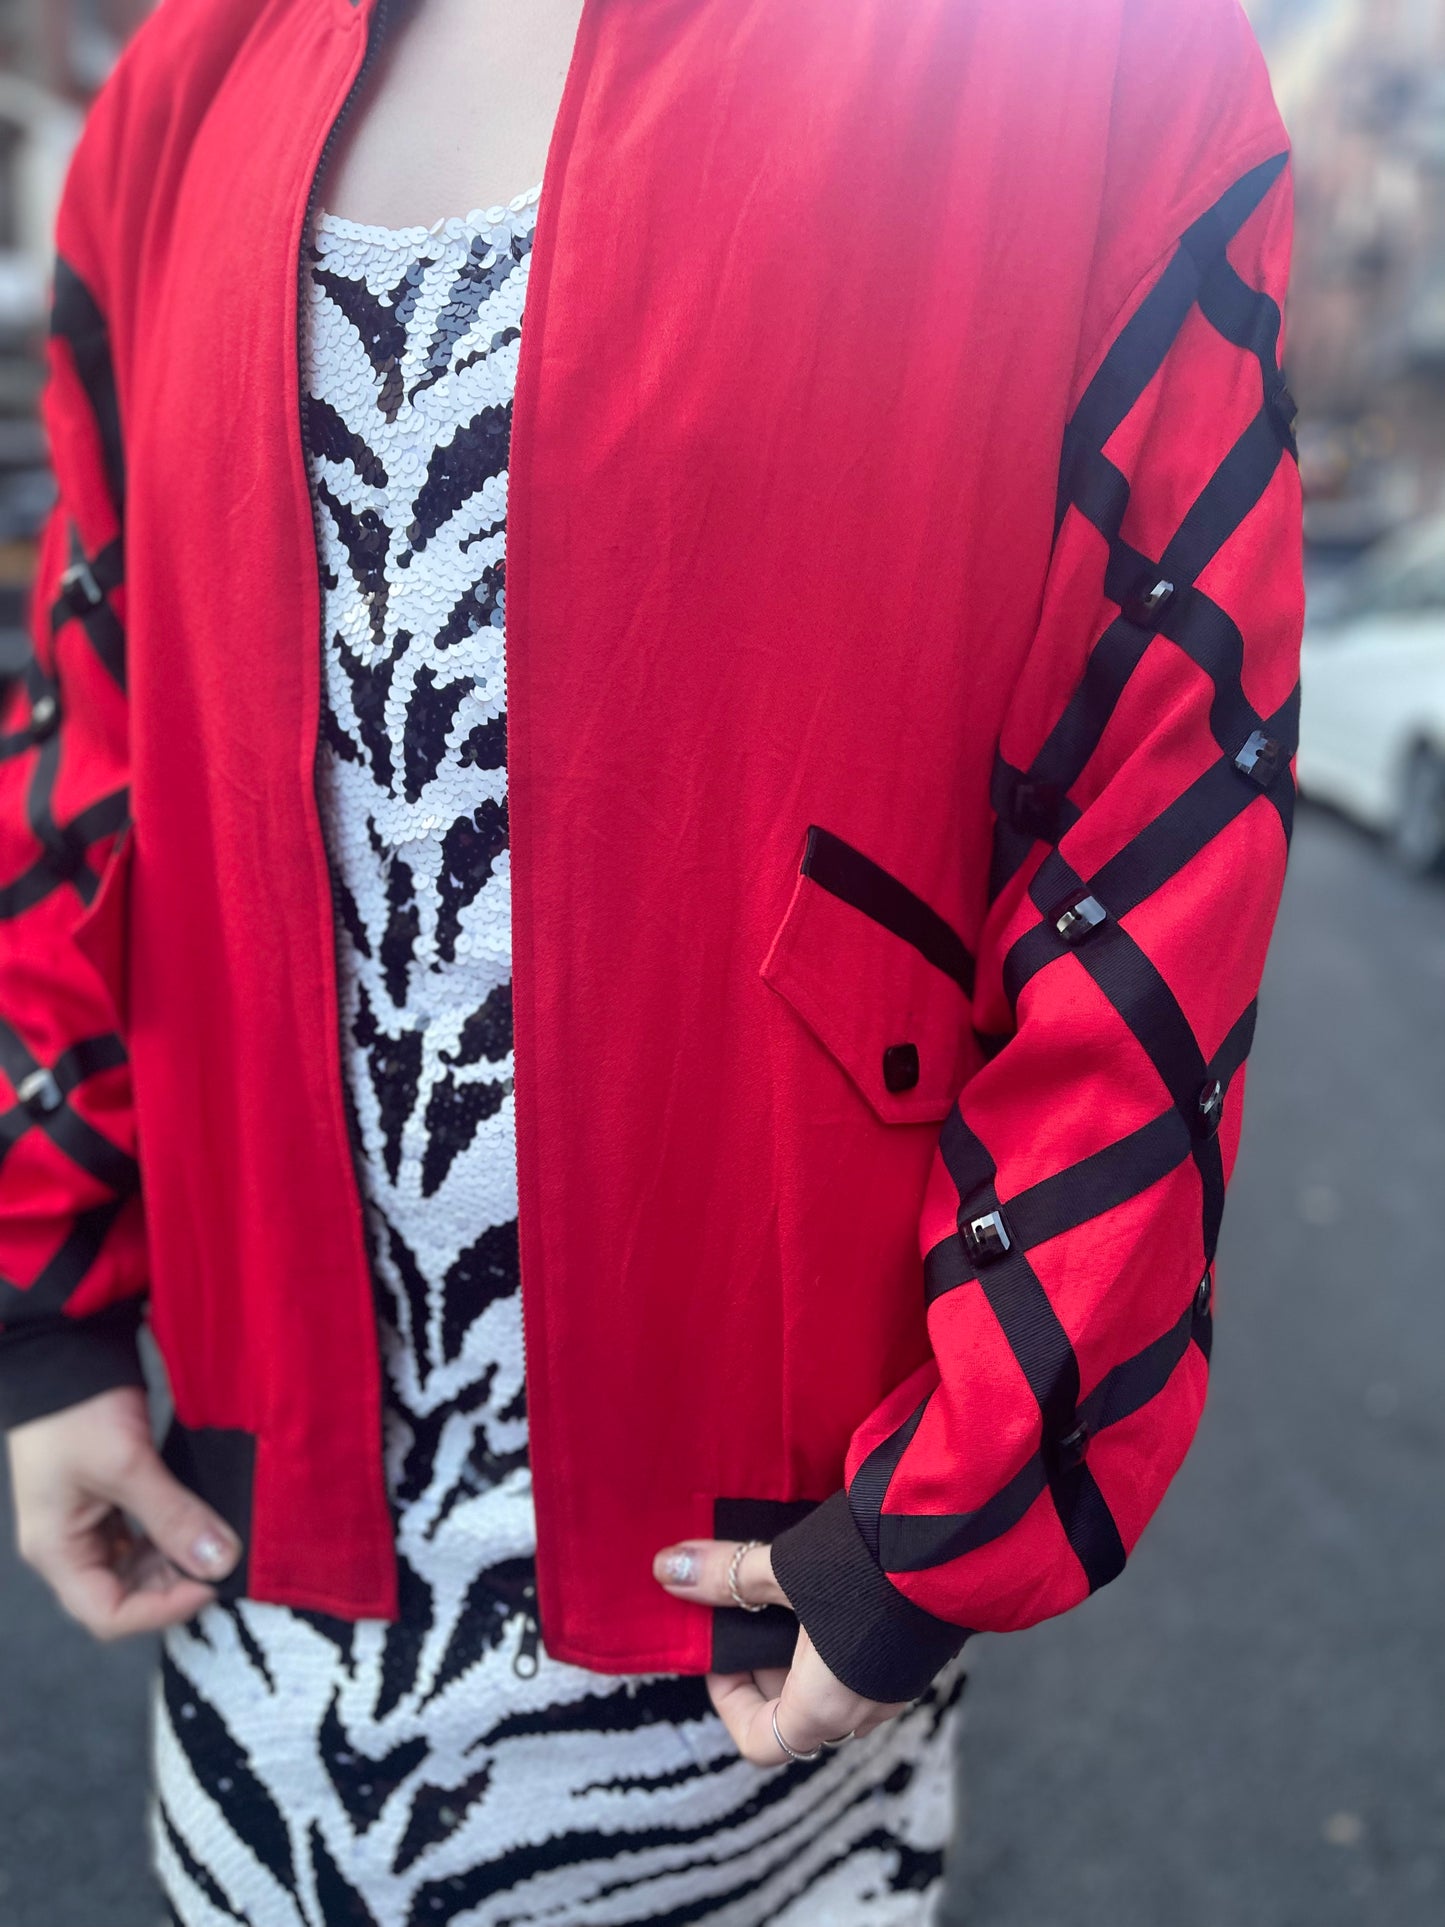 Vintage 80s Red and Black Bomber Jacket - Spark Pretty